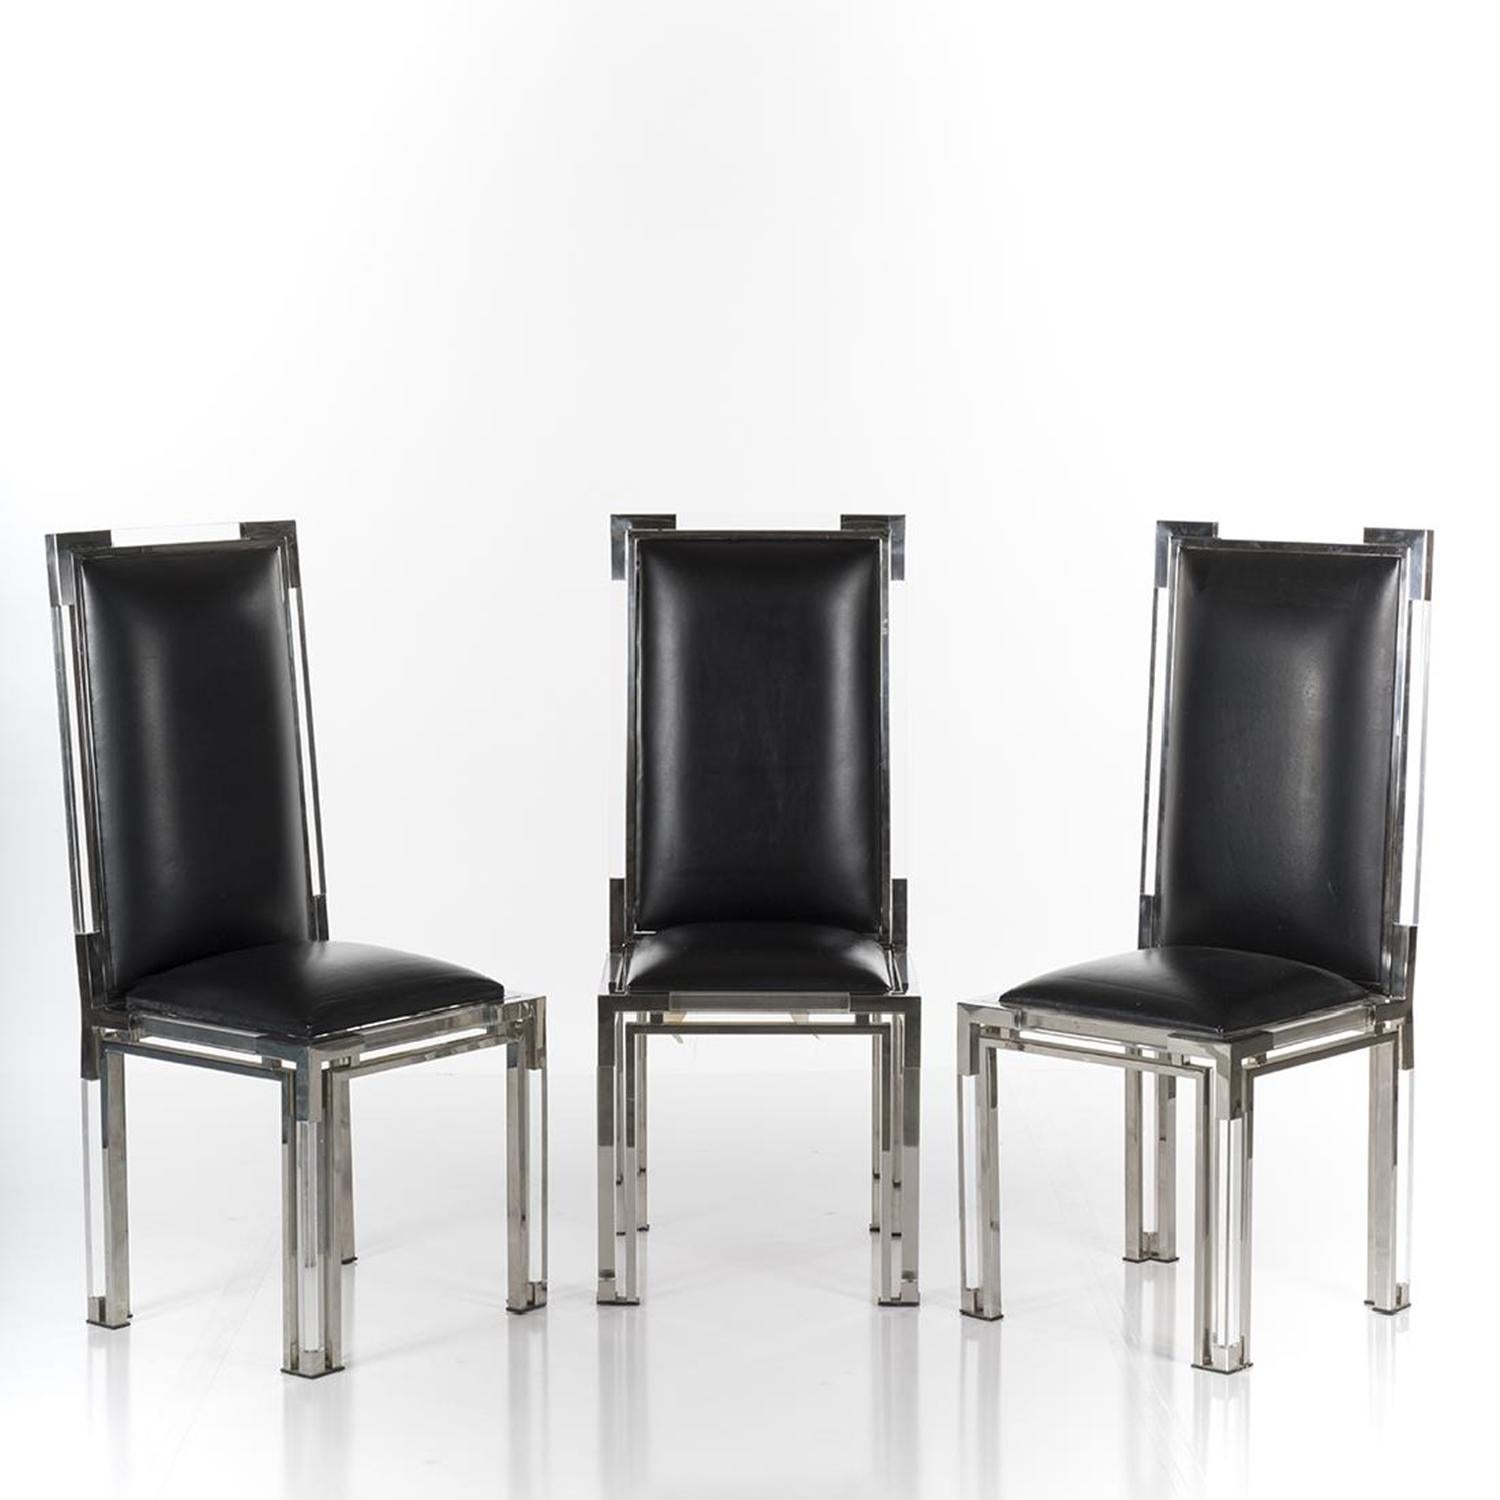 Beautiful set of 6 Lucite and chrome dining chairs from the Metric collection by Charles Hollis Jones 5 upholstered in black vinyl and 1 upholstered in white vinyl.
The chairs date to the 1960s and they show wear and tear, the chrome shows